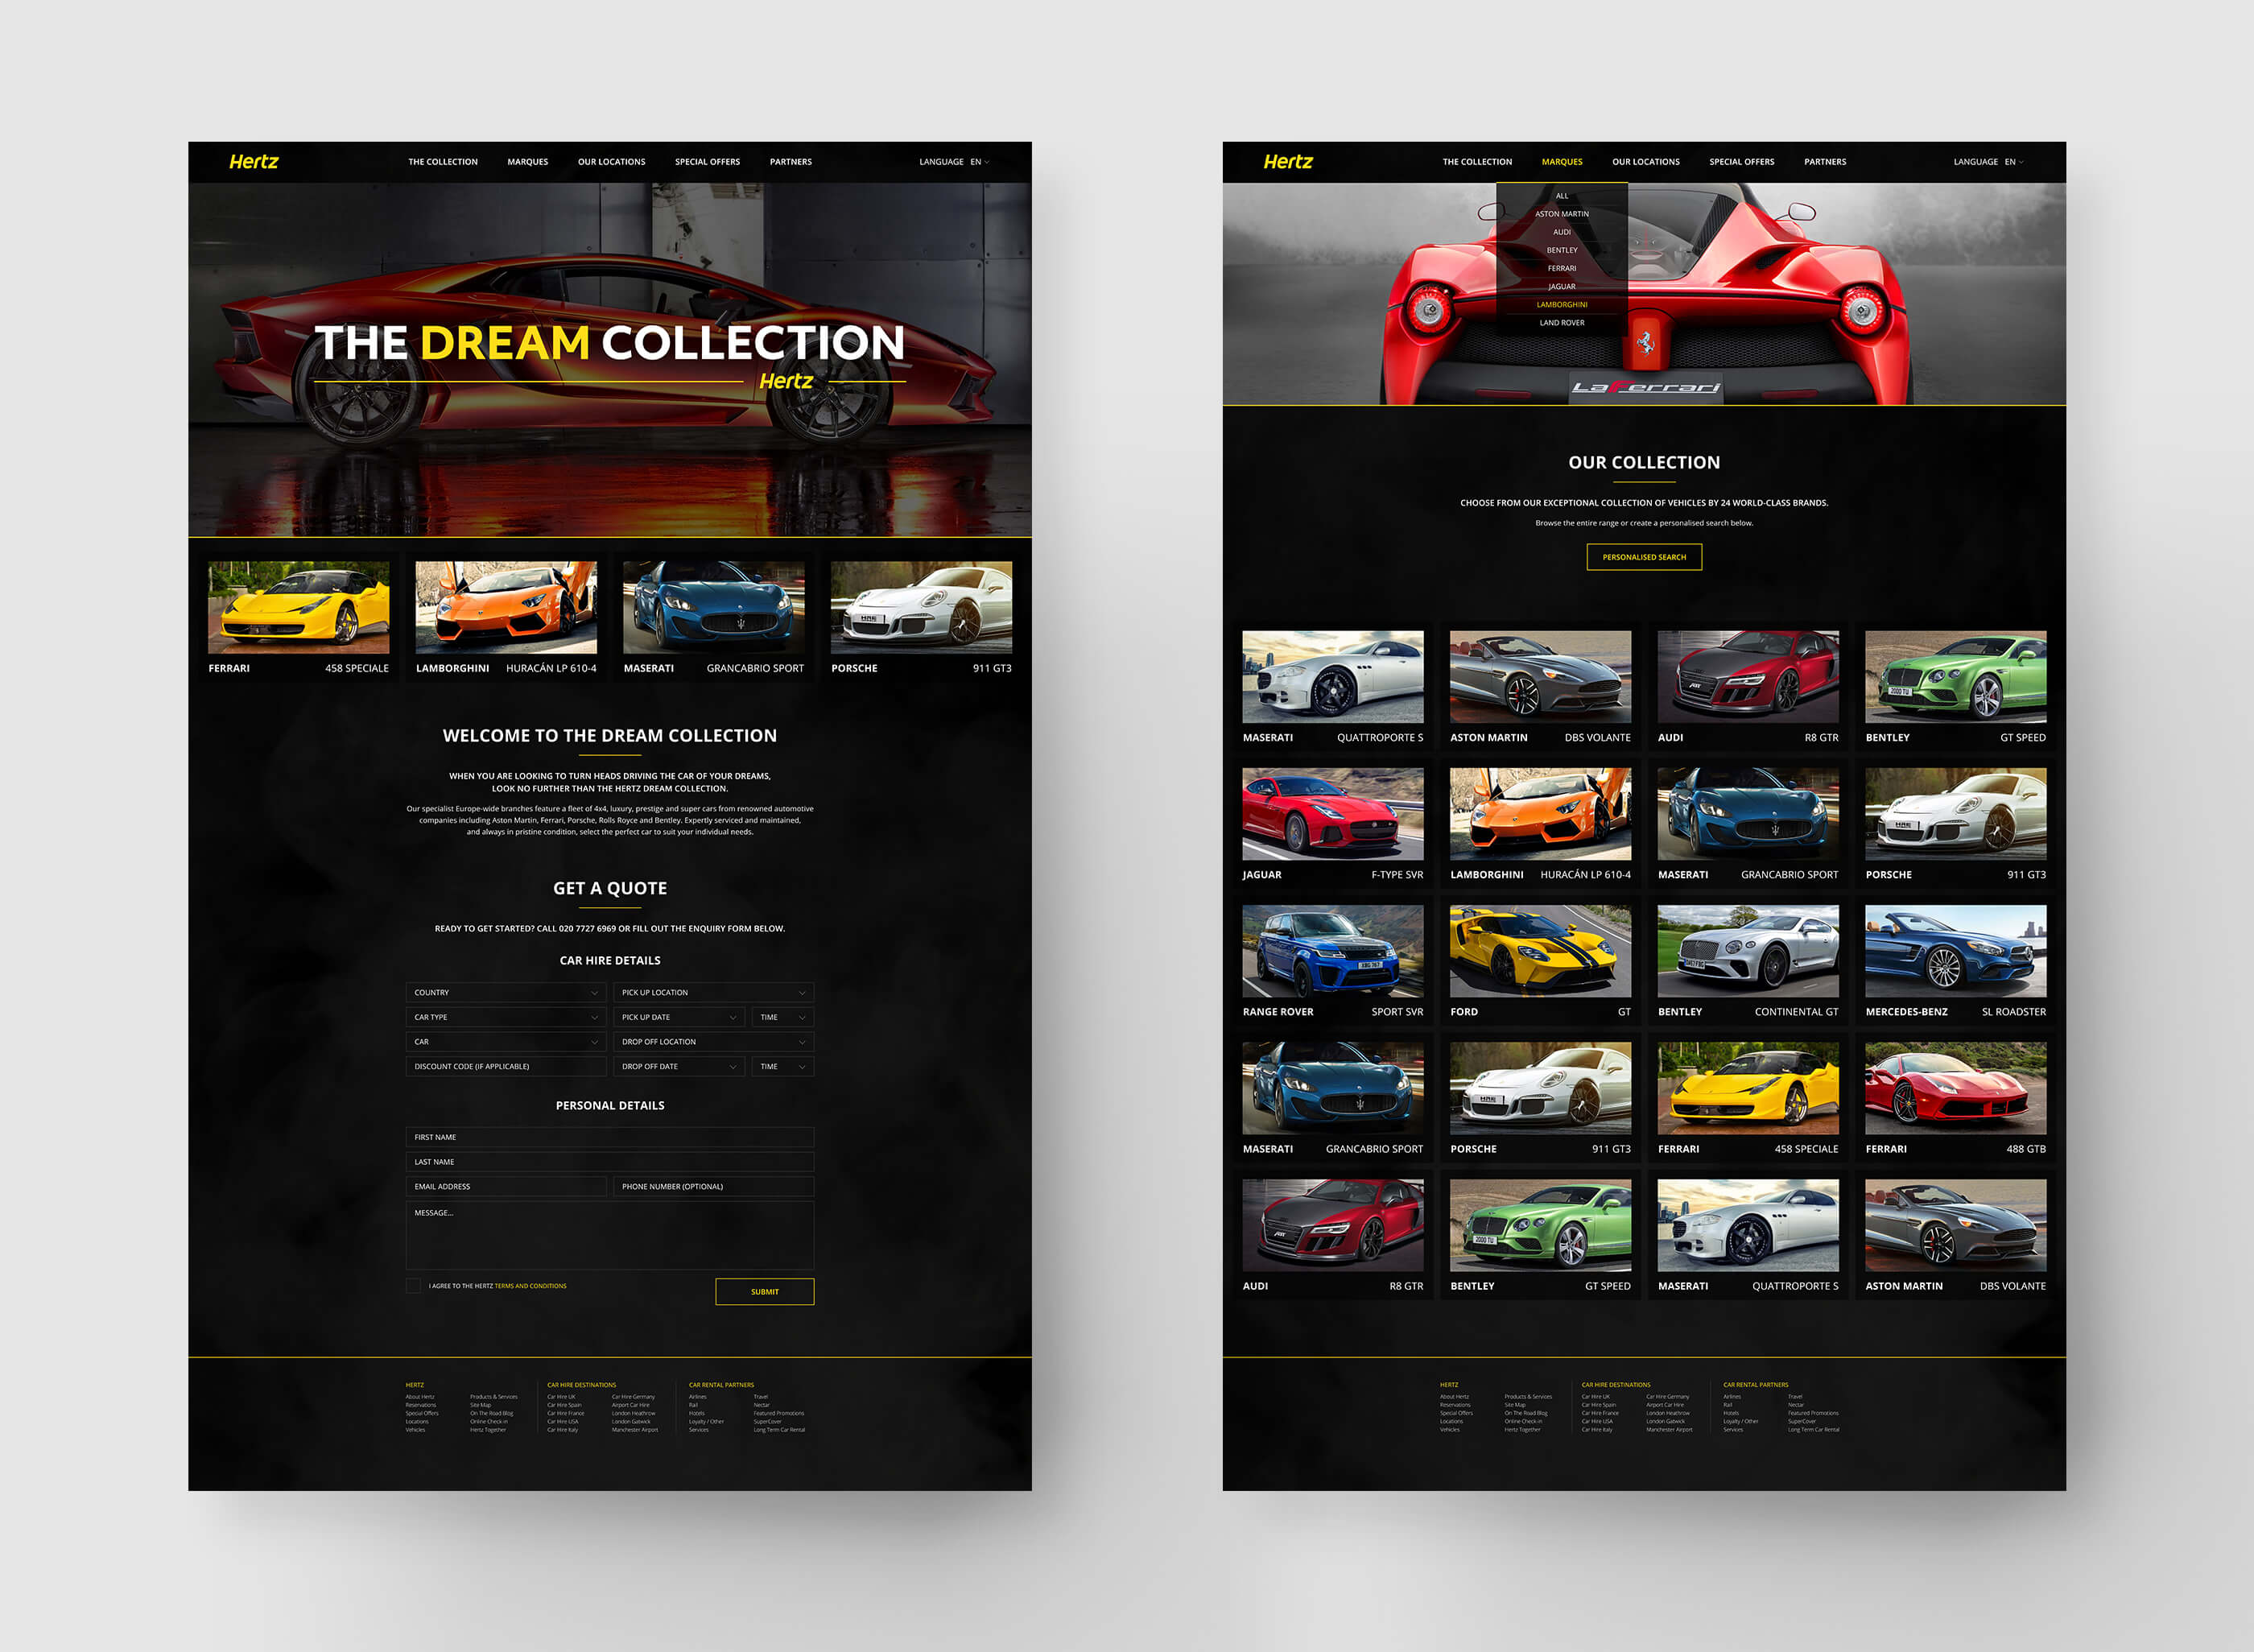 Full designs of the homepage and car collection webpages, including quote form and supercar thumbnails on a black background